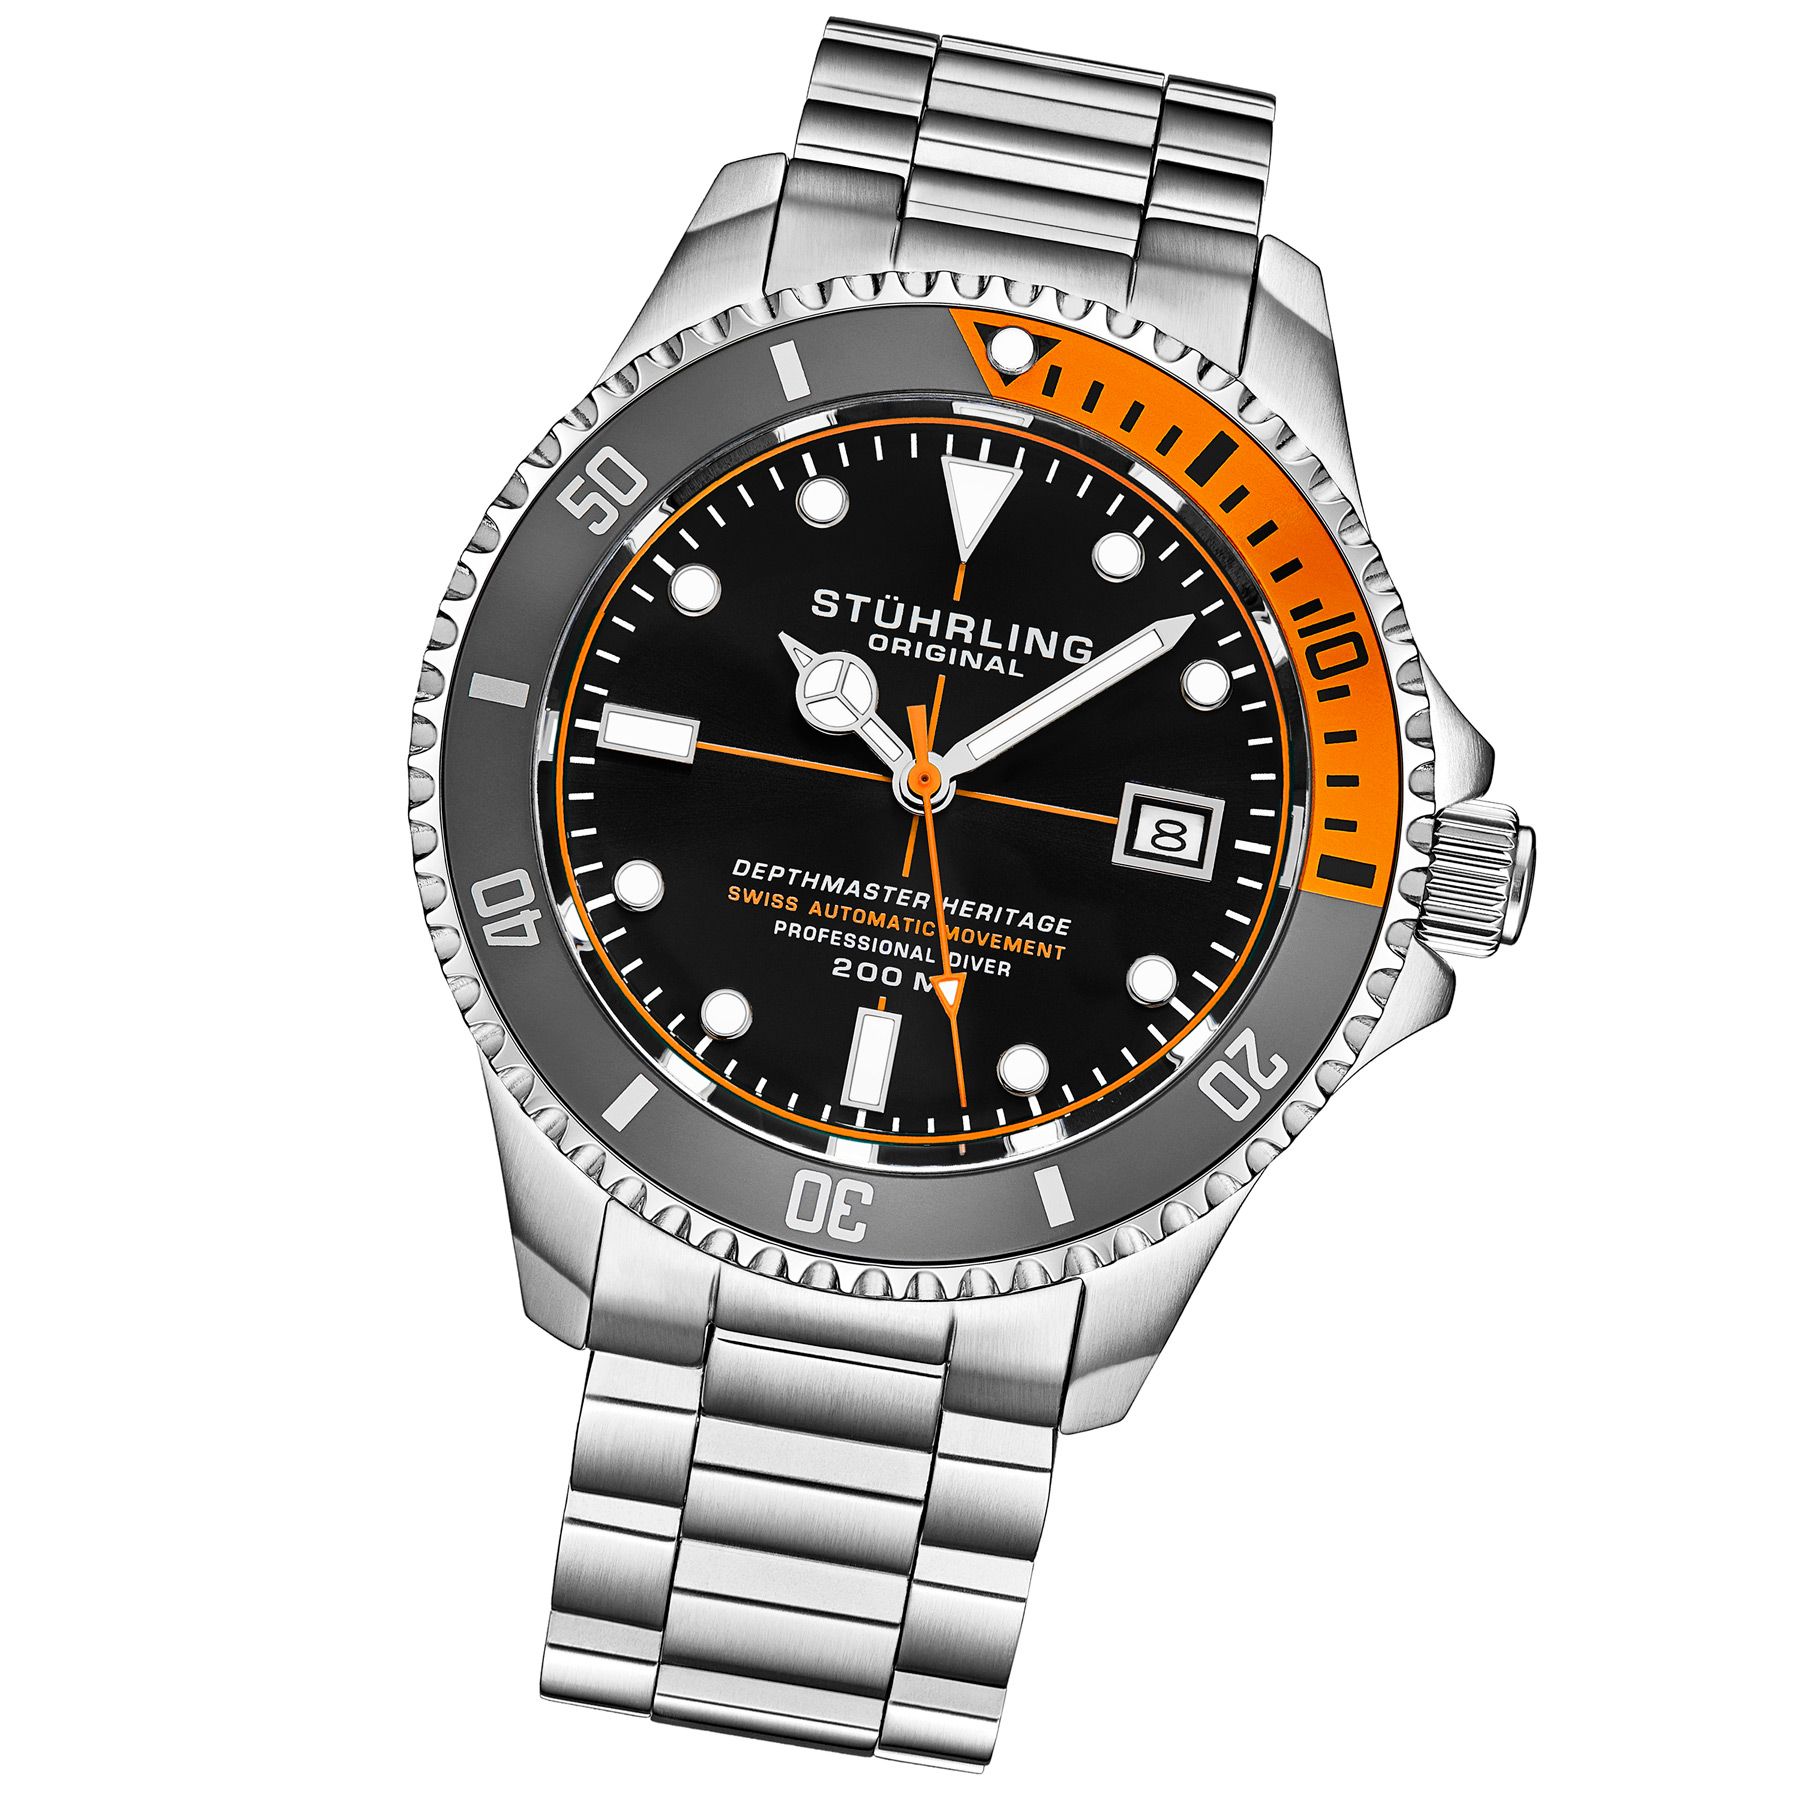 Men's Swiss Automatic Watch, Stainless Steel Case, Black Dial, Stainless Steel Bracelet, Exhibition Caseback, Thick Domed Crystal, 20ATM, Gray and Orange Bezel